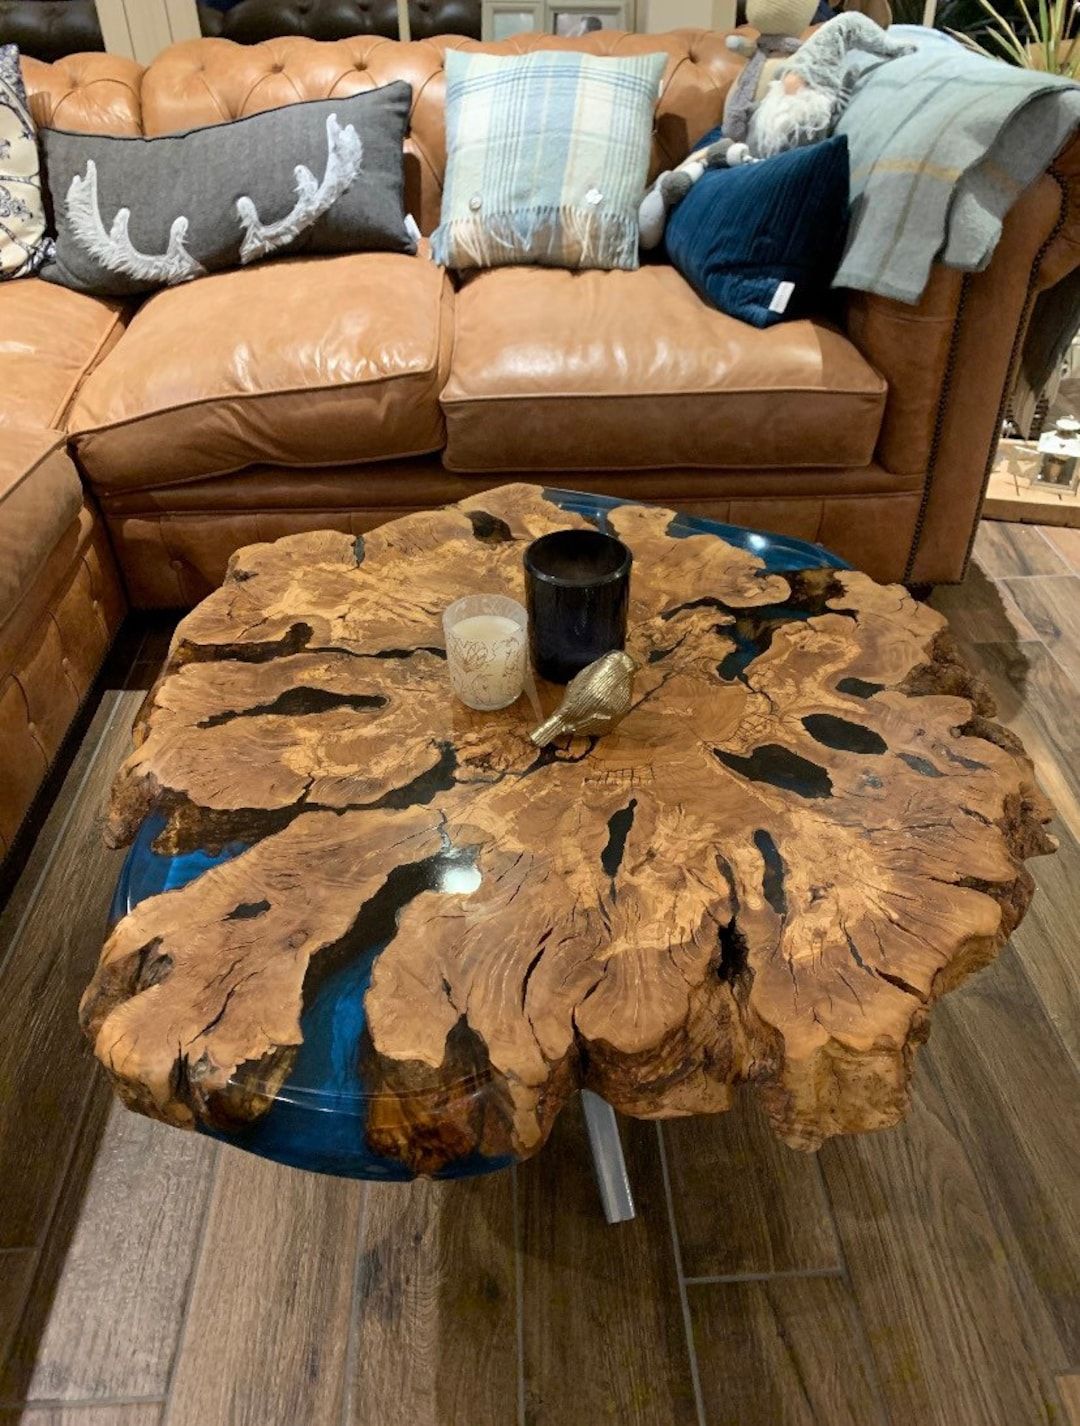 Live Edge Coffee Table With Epoxy Resin Olive Wood Burl Slab – Etsy Uk Within Coffee Tables For 4 6 People (View 19 of 20)